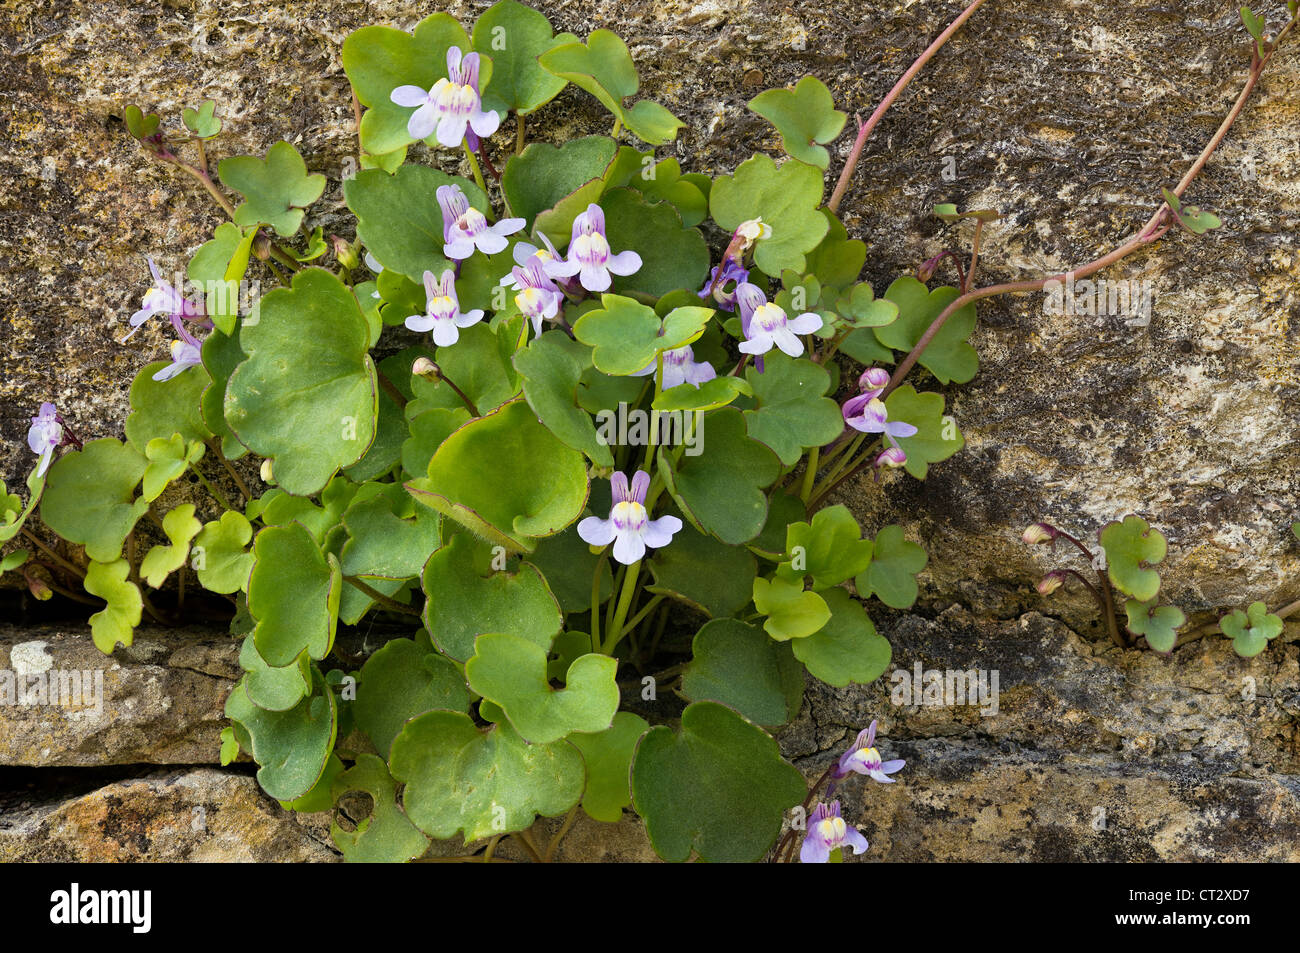 Cymbalaria muralis Ivy-leaved toadflax or Kenilworth Ivy Stock Photo